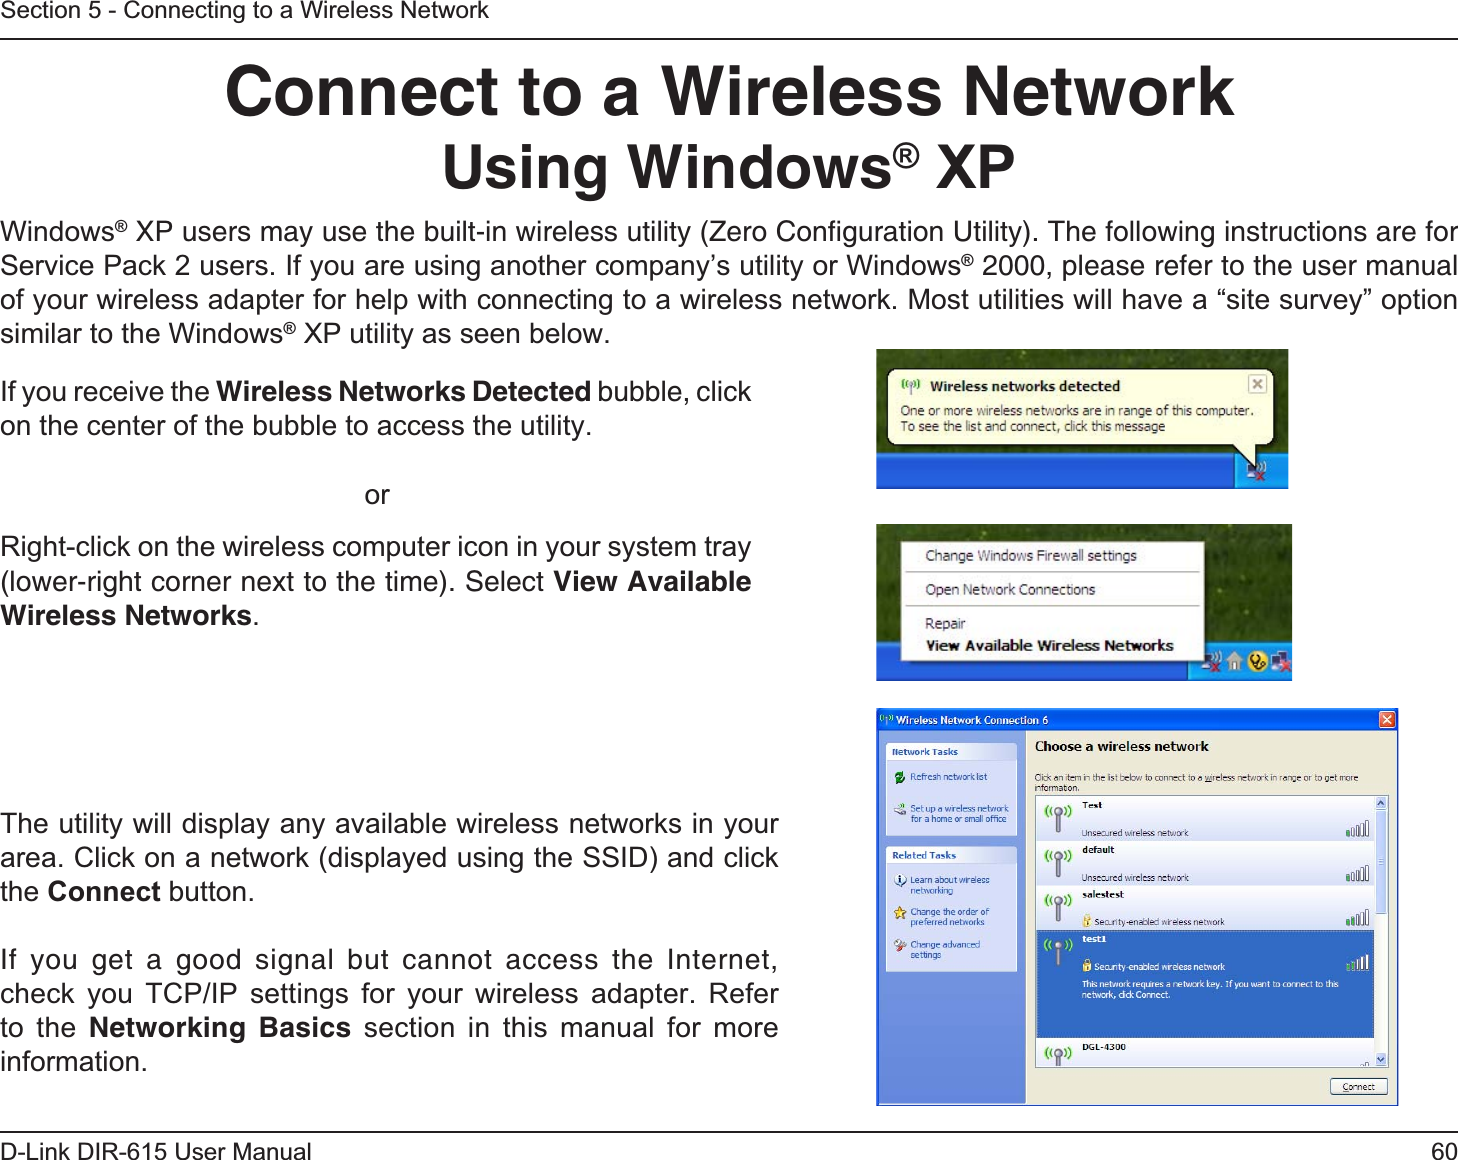 60D-Link DIR-615 User ManualSection 5 - Connecting to a Wireless NetworkConnect to a Wireless NetworkUsing Windows® XPWindows® XP users may use the built-in wireless utility (Zero Conﬁguration Utility). The following instructions are for Service Pack 2 users. If you are using another company’s utility or Windows® 2000, please refer to the user manual of your wireless adapter for help with connecting to a wireless network. Most utilities will have a “site survey” option similar to the Windows® XP utility as seen below.Right-click on the wireless computer icon in your system tray (lower-right corner next to the time). Select View Available Wireless Networks.If you receive the Wireless Networks Detected bubble, click on the center of the bubble to access the utility.     orThe utility will display any available wireless networks in your area. Click on a network (displayed using the SSID) and click the Connect button.If you get a good signal but cannot access the Internet, check you TCP/IP settings for your wireless adapter. Refer to the Networking Basics section in this manual for more information.